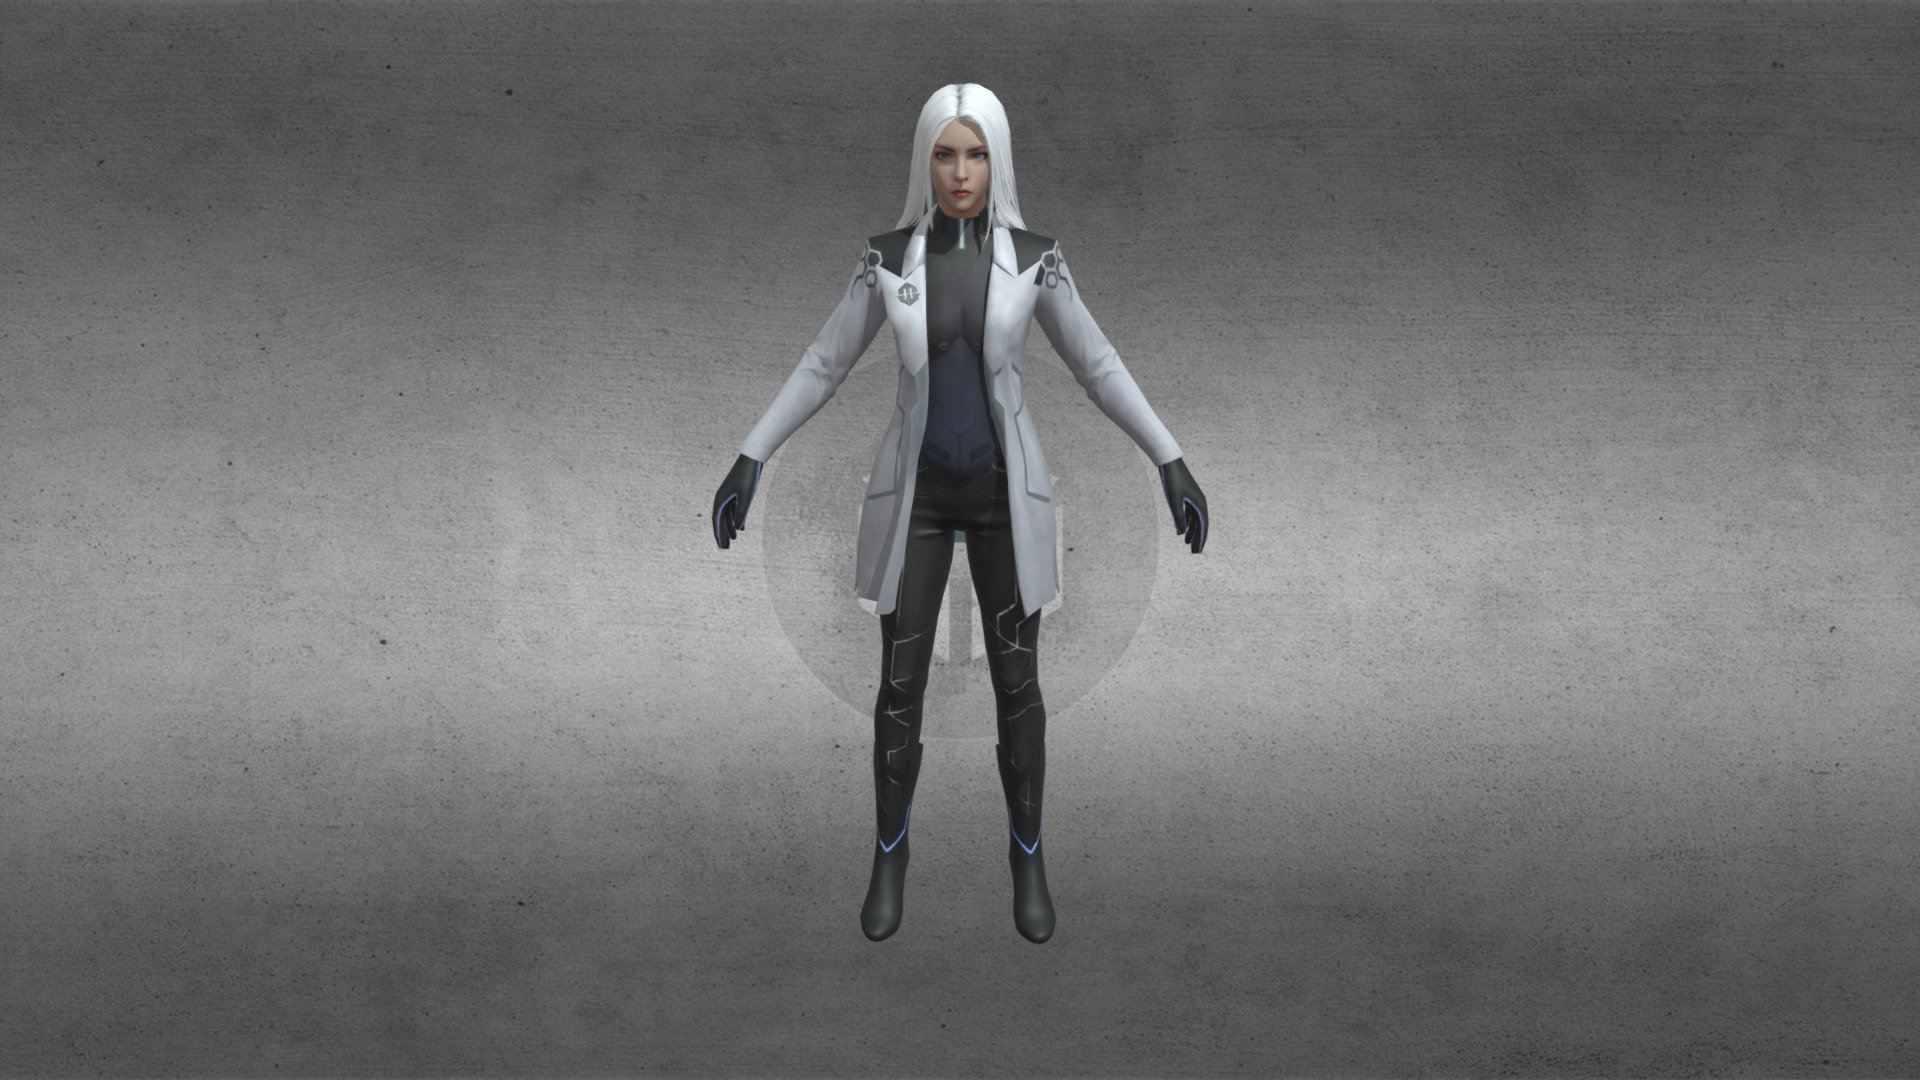 freefire new female 3d model by pace gaming
FOLLOW FOR MORE MODELS - freefire new female 3d model by pace gaming - Download Free 3D model by PACE GAMING FF (@MDARBAZ_.OR___-PACEGAMINGFF) 3d model